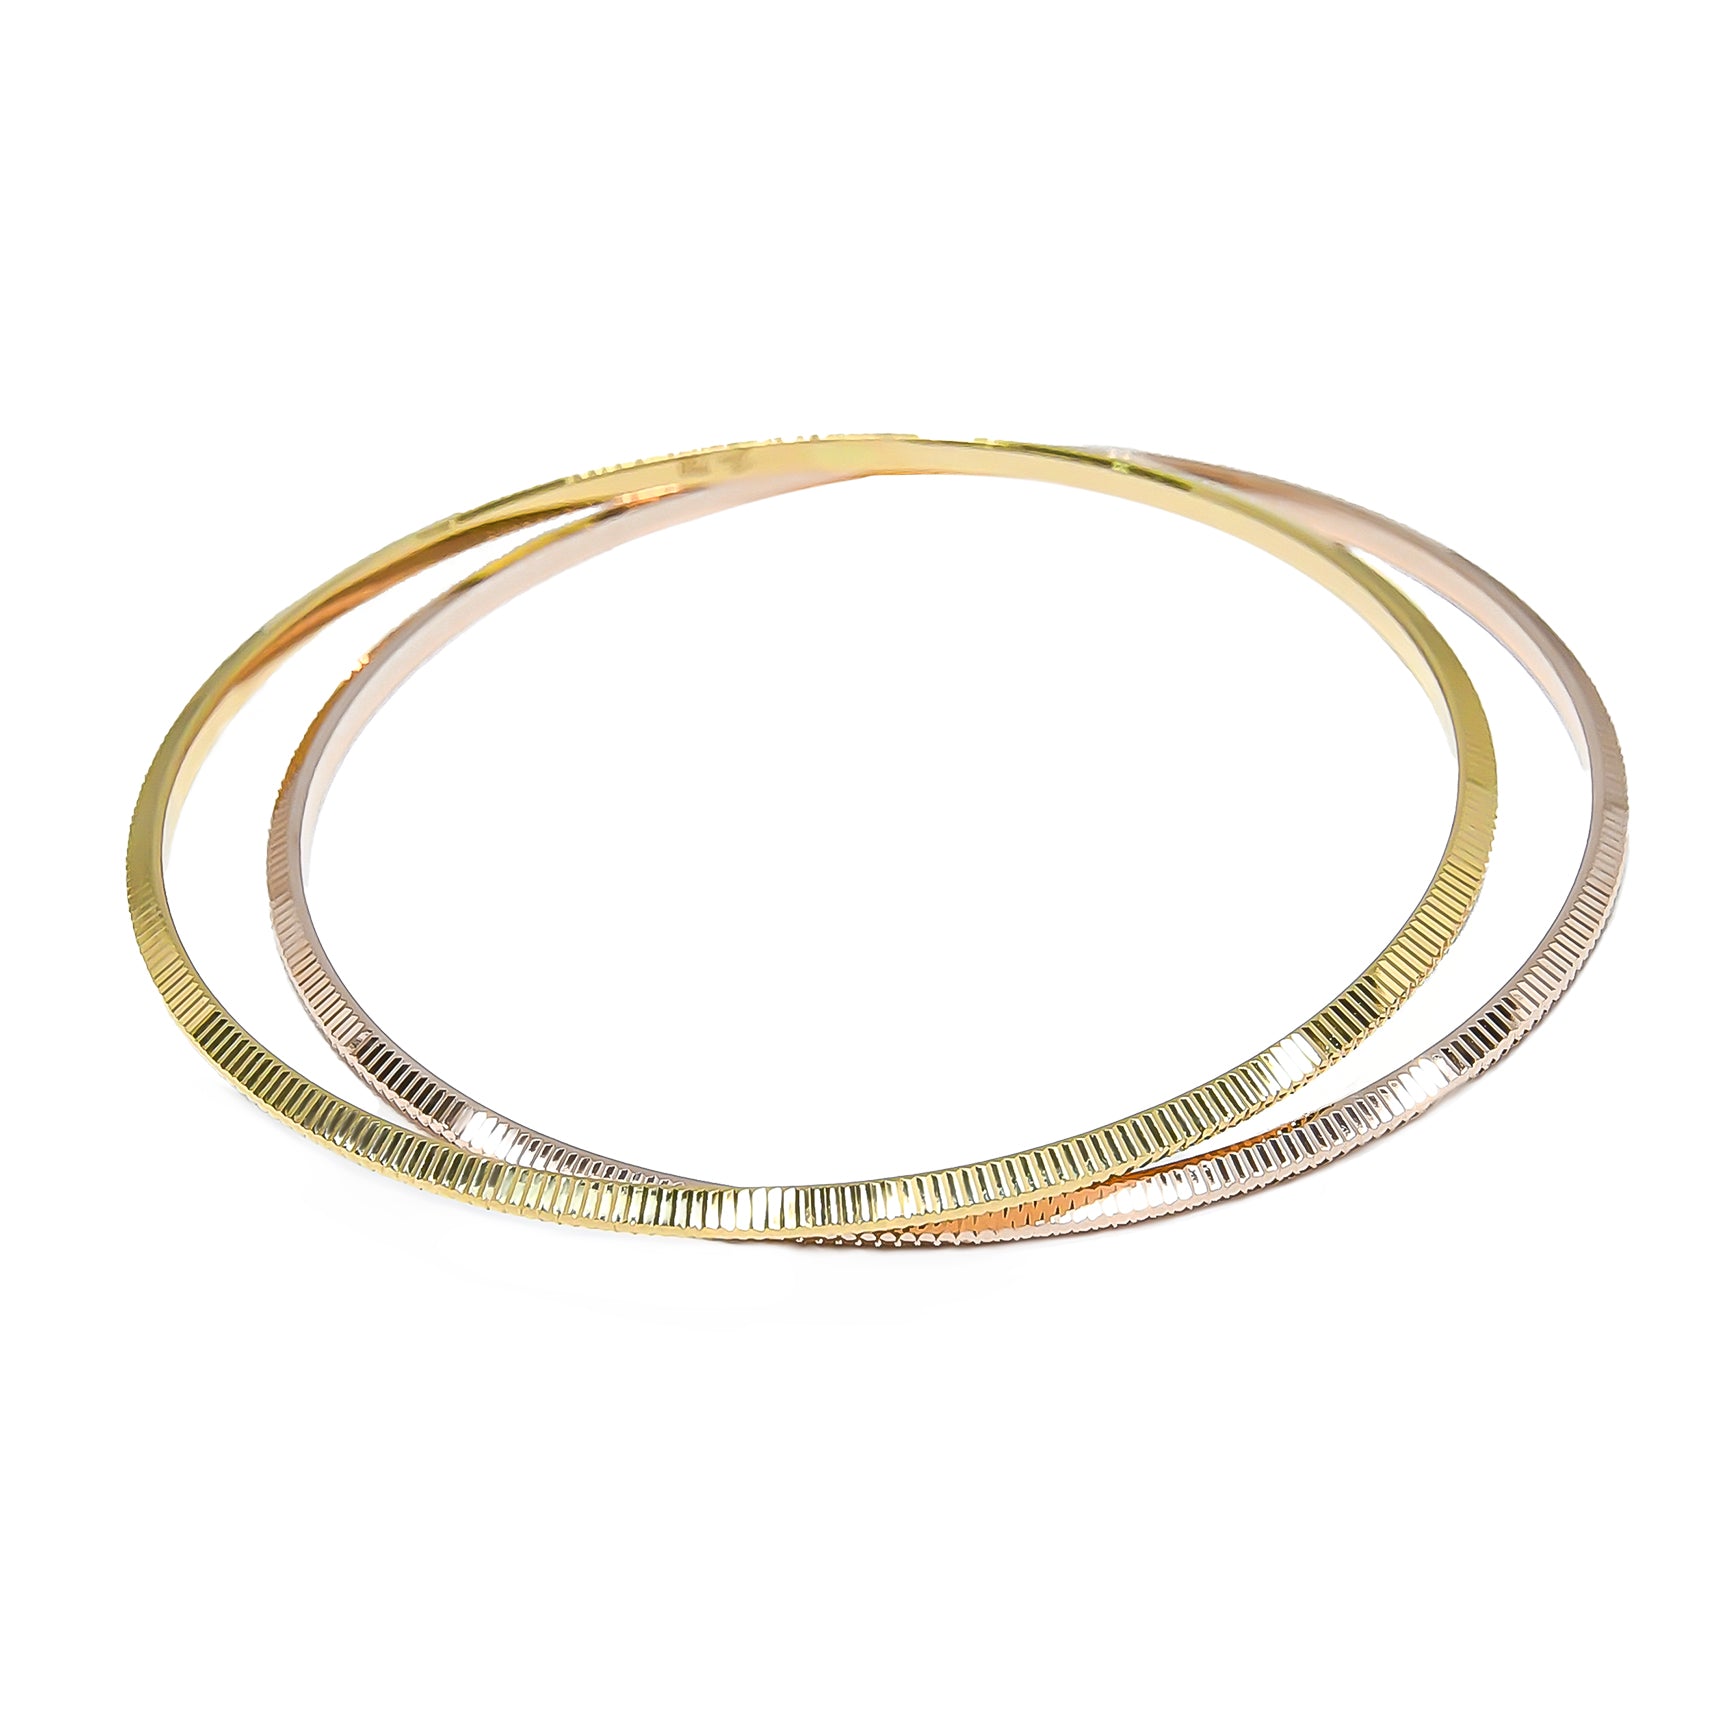 Bangle EARTH IS ROUND 2mm triangle profile yellow gold 18k 750